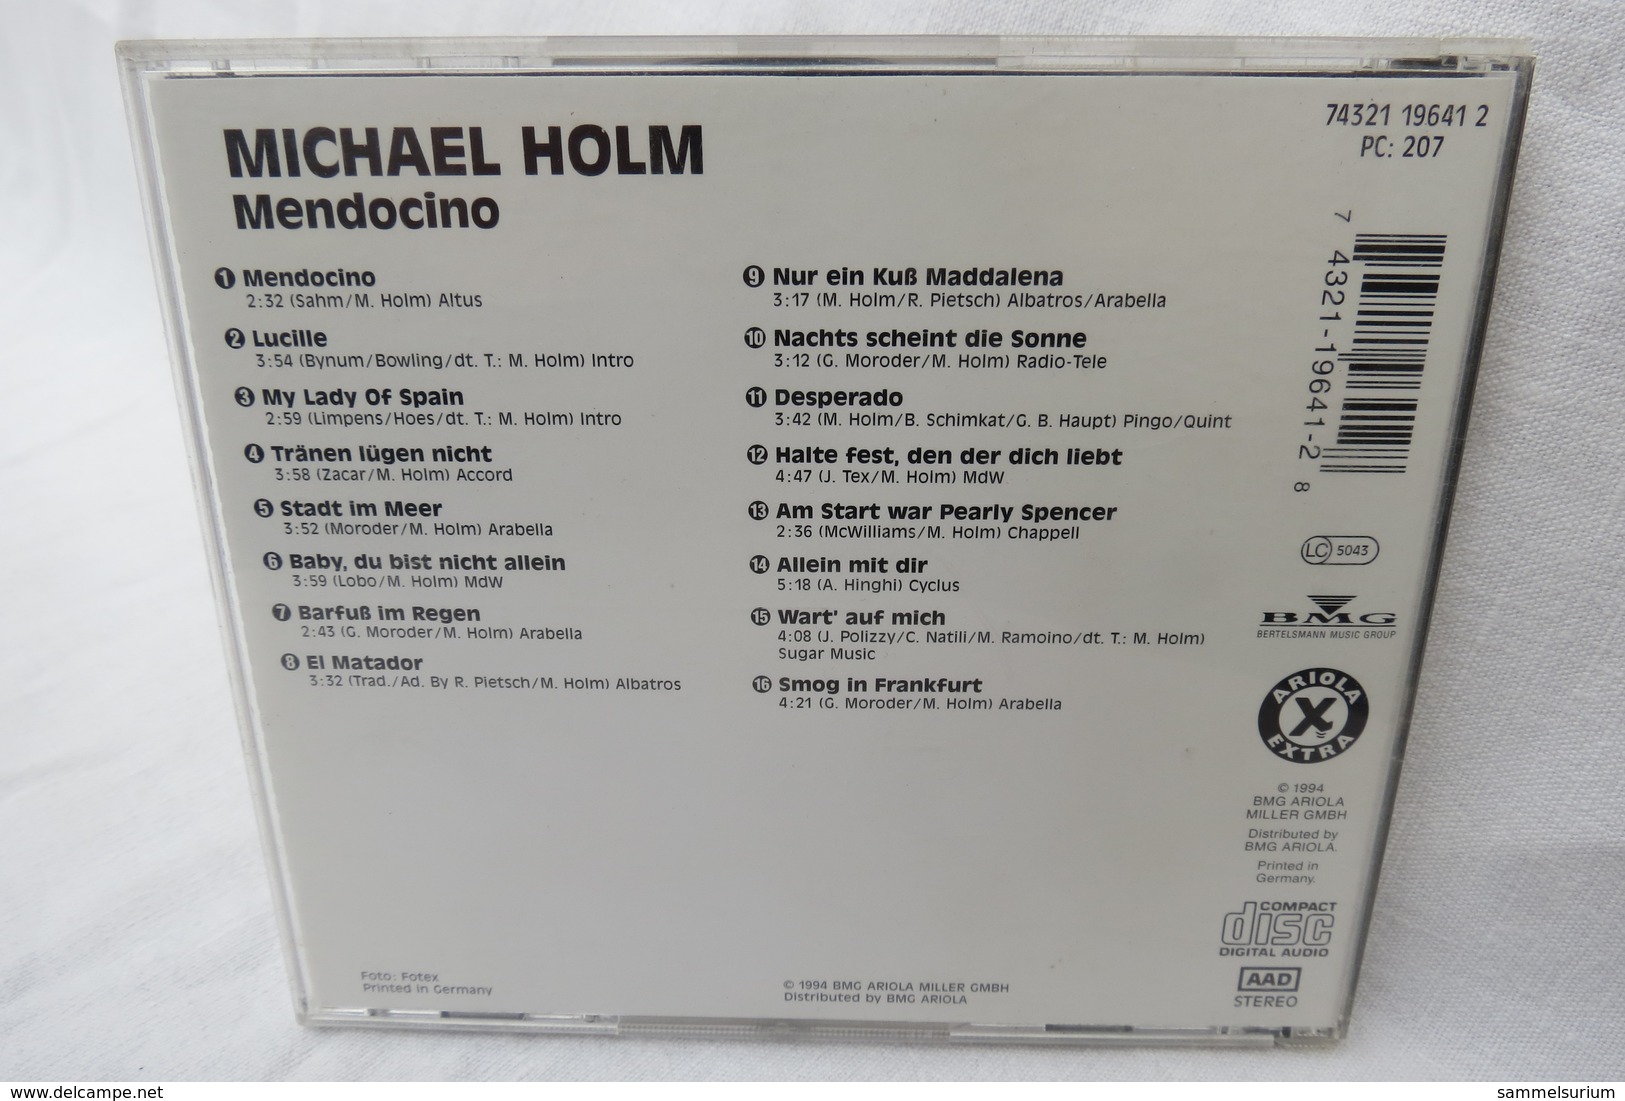 CD "Michael Holm" Mendocino - Other - German Music